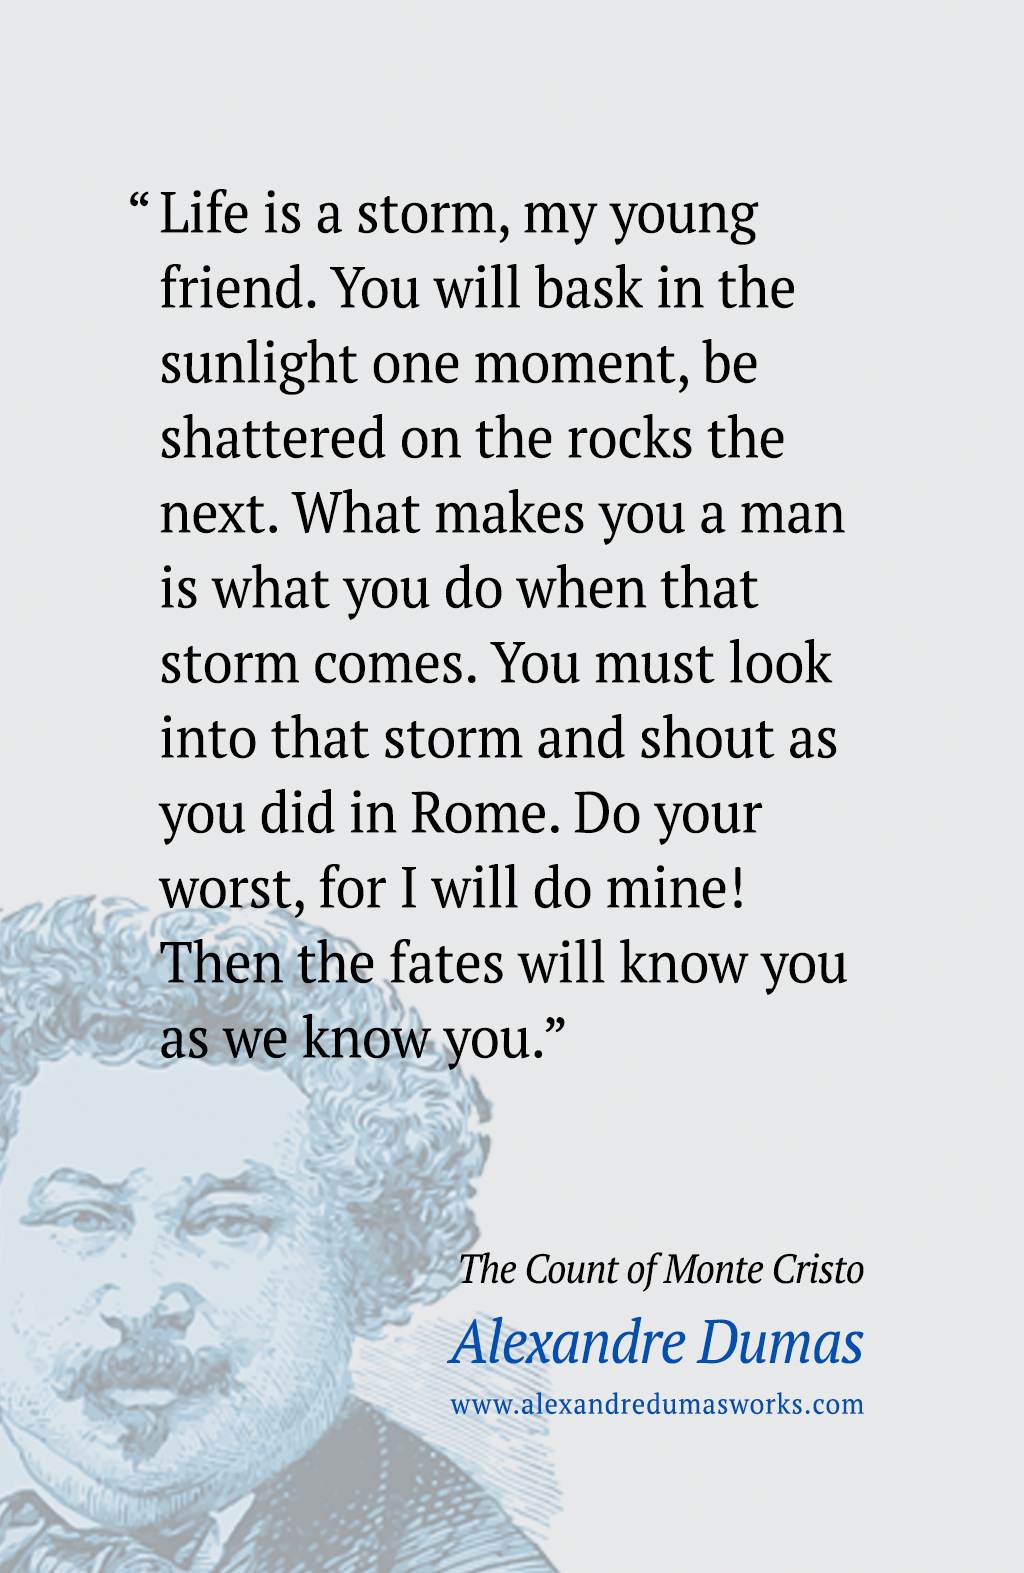 “Life is a storm, my young friend." ― Alexandre Dumas, The Count of Monte Cristo